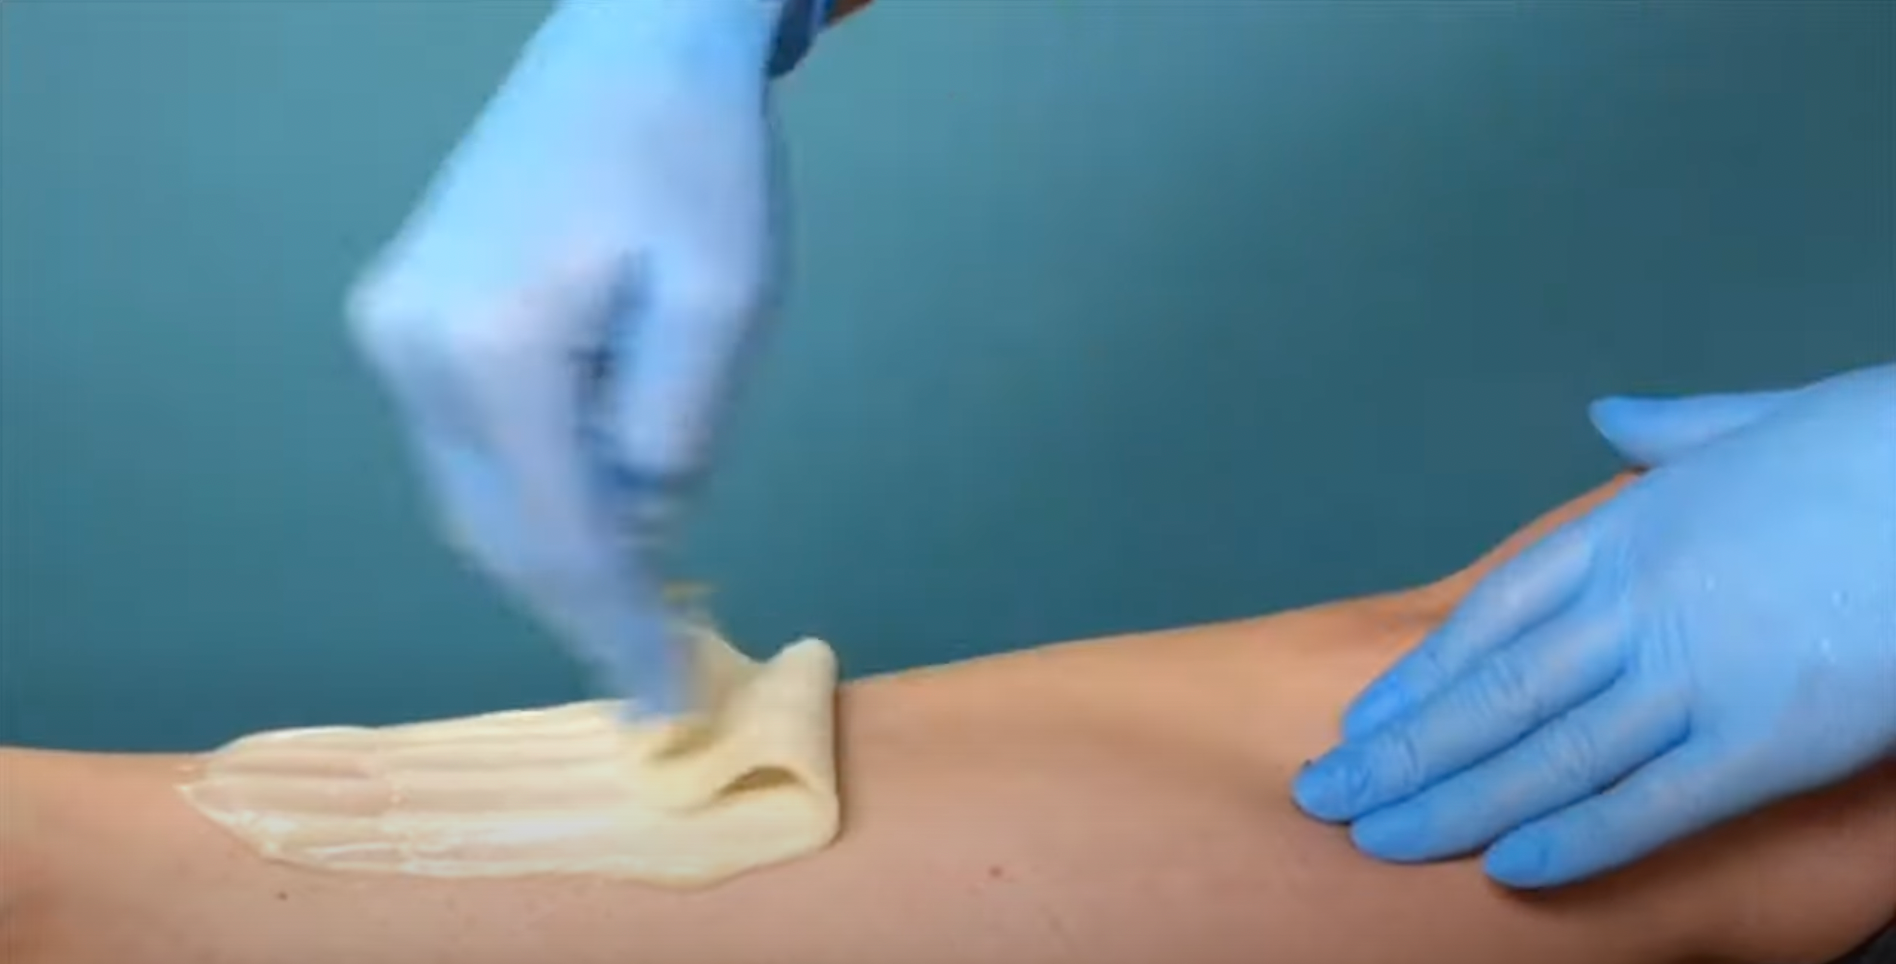 Watch a video about how to properly flick sugar paste